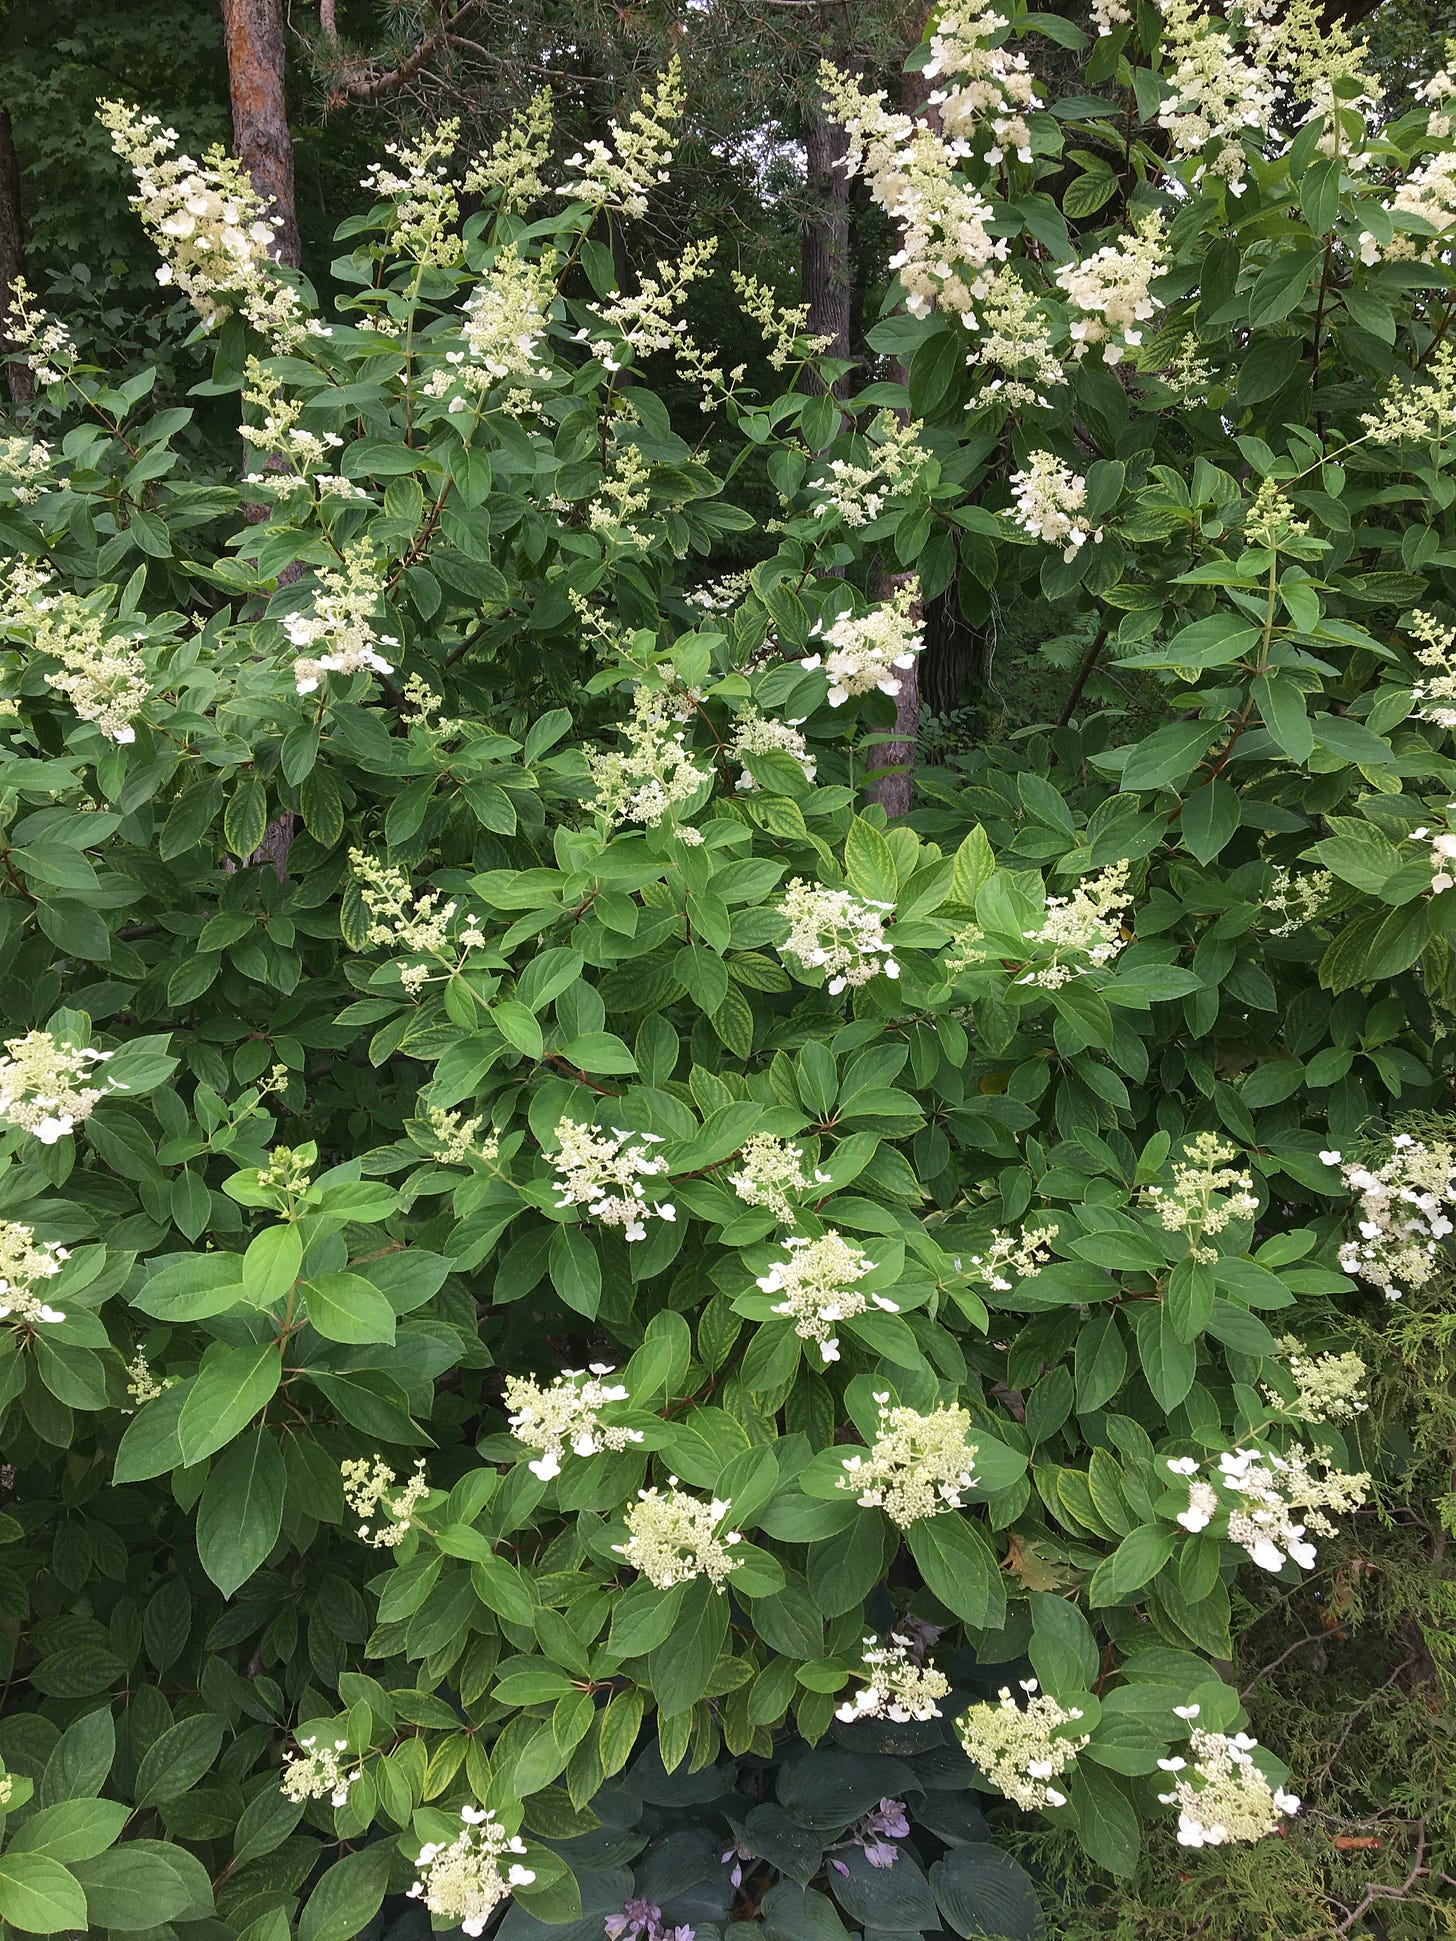 a green bush with little white flowers (wish I could identify what it is!)